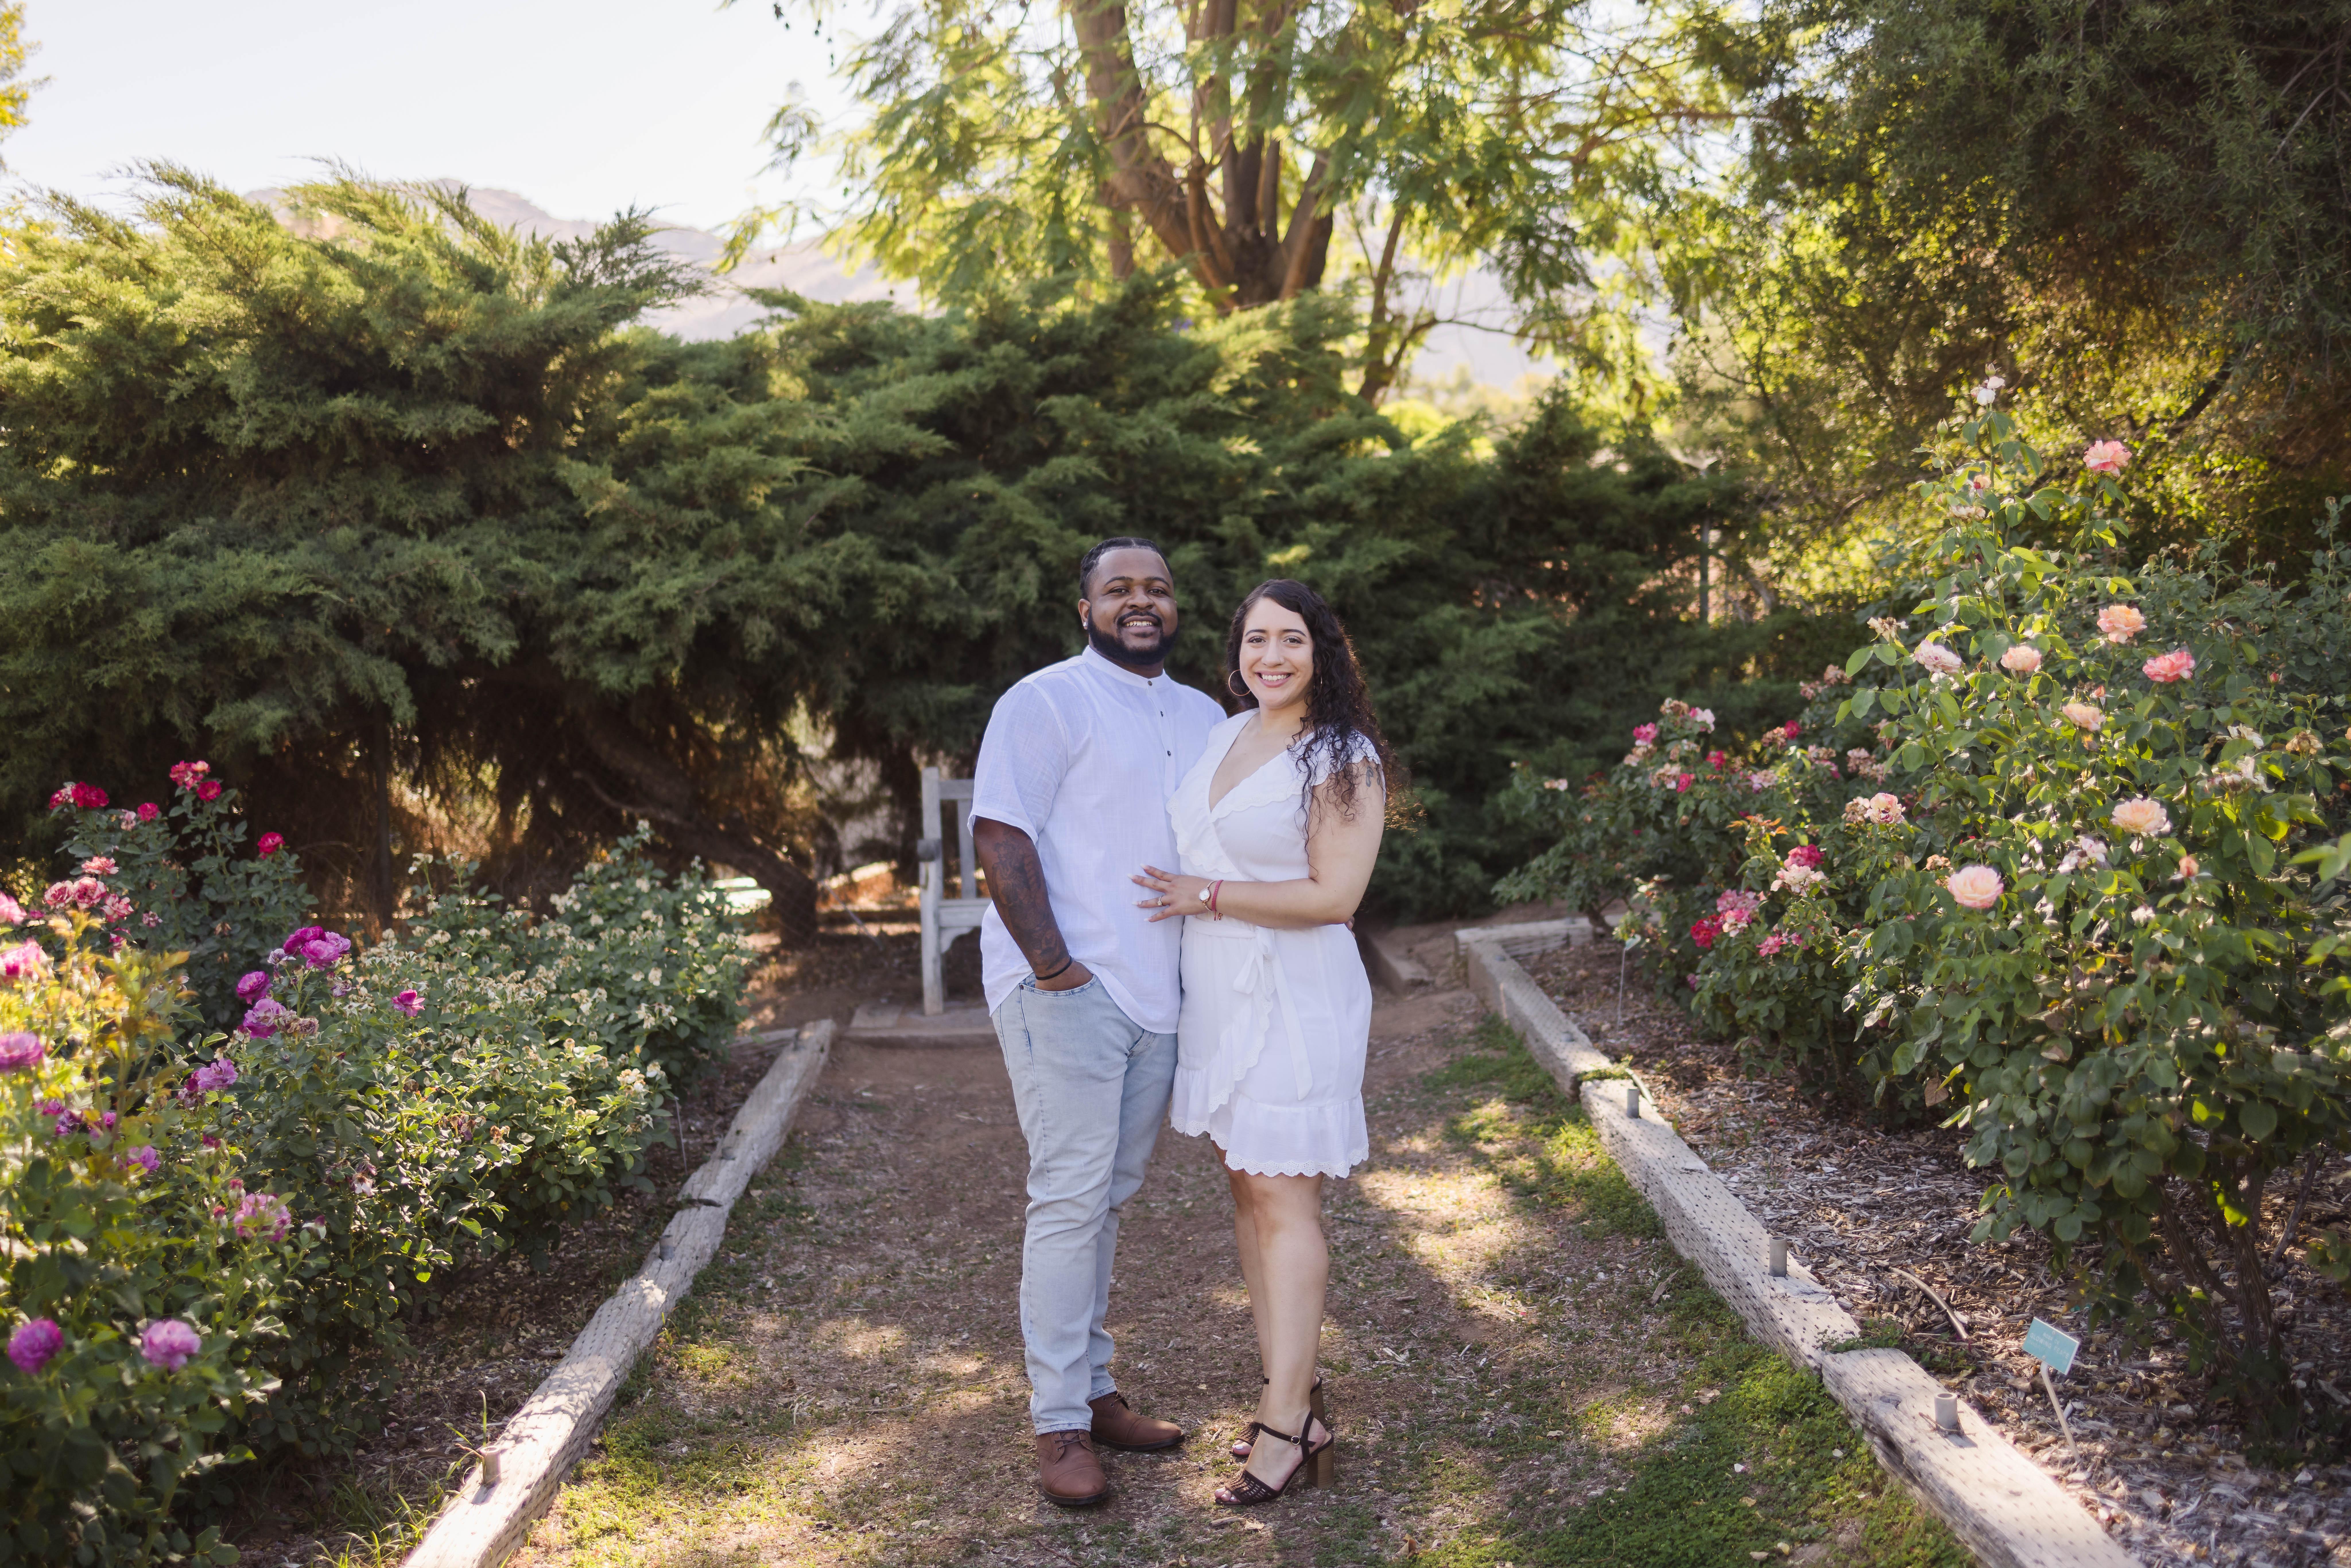 The Wedding Website of Stephanie Marquez and Jeremy Henry